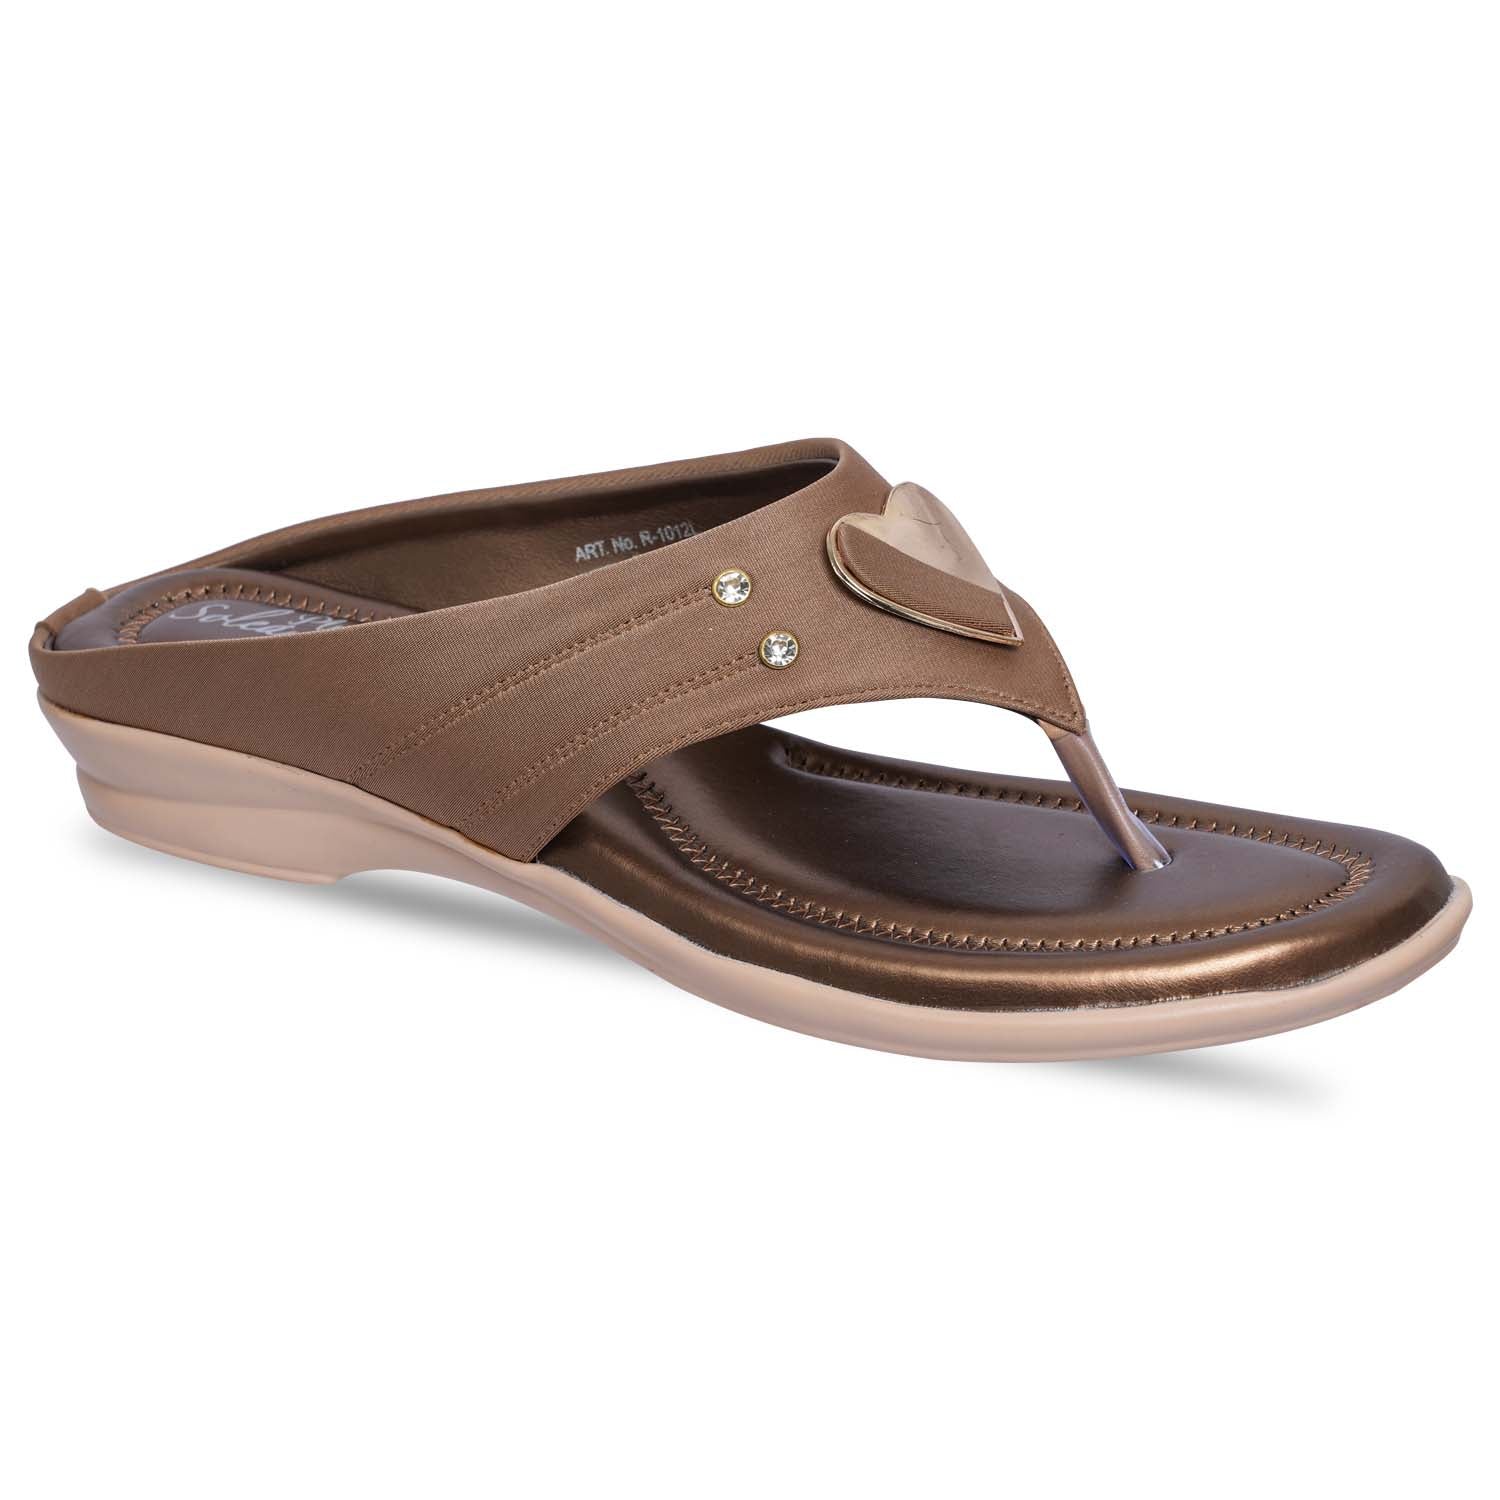 Paragon R1012L Women Sandals | Casual &amp; Formal Sandals | Stylish, Comfortable &amp; Durable | For Daily &amp; Occasion Wear